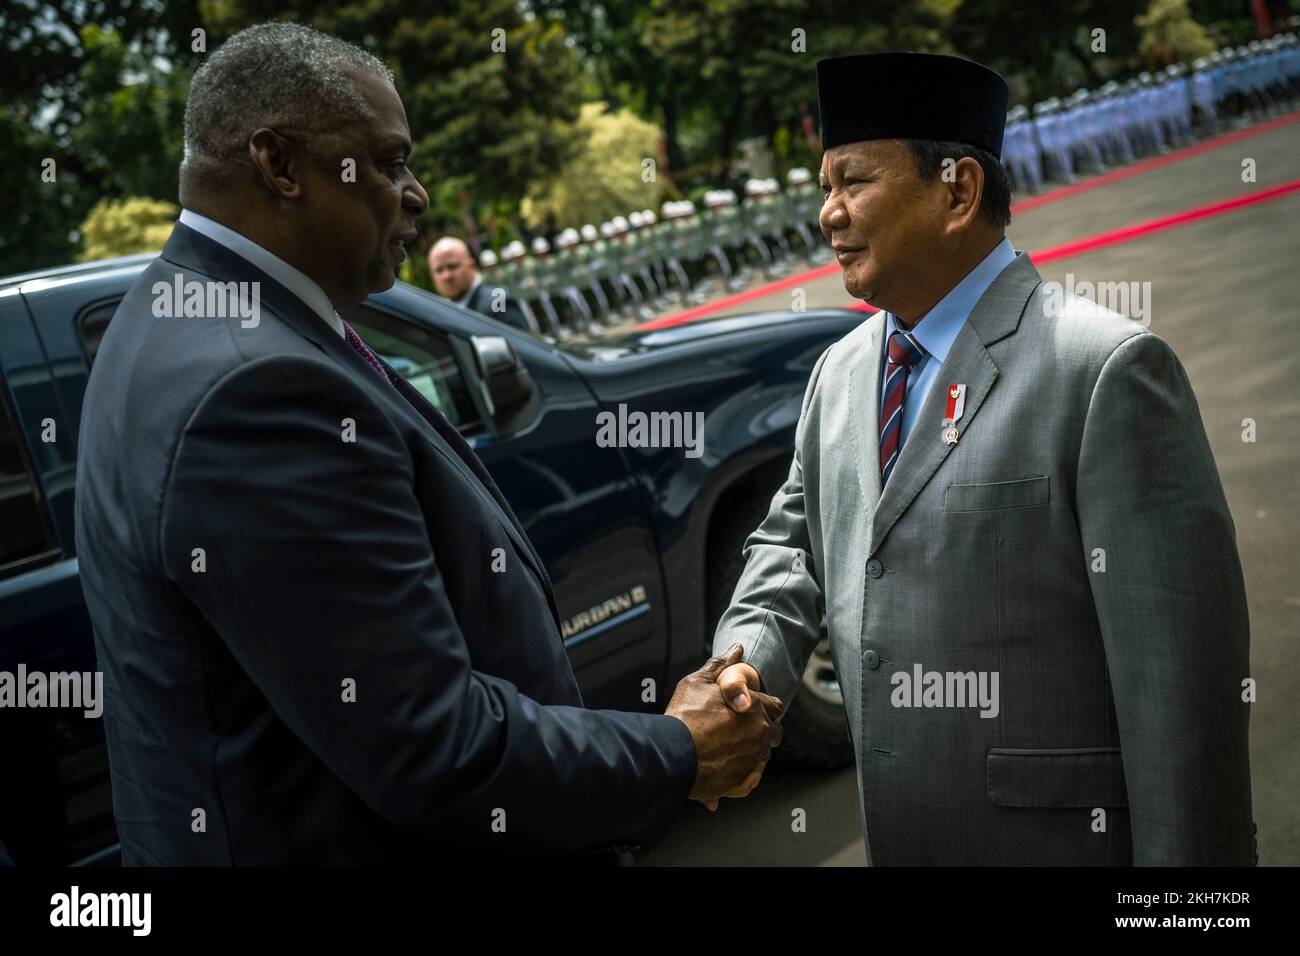 Jakarta, Indonesia. 21 November, 2022. U.S. Secretary of Defense Lloyd J. Austin III, left, is welcomed by Indonesian Defense Minister Prabowo Subianto for the formal arrival ceremony at the Ministry of Defense building, November 21, 2022 in Jakarta, Indonesia. Credit: Chad J. McNeeley/DOD/Alamy Live News Stock Photo